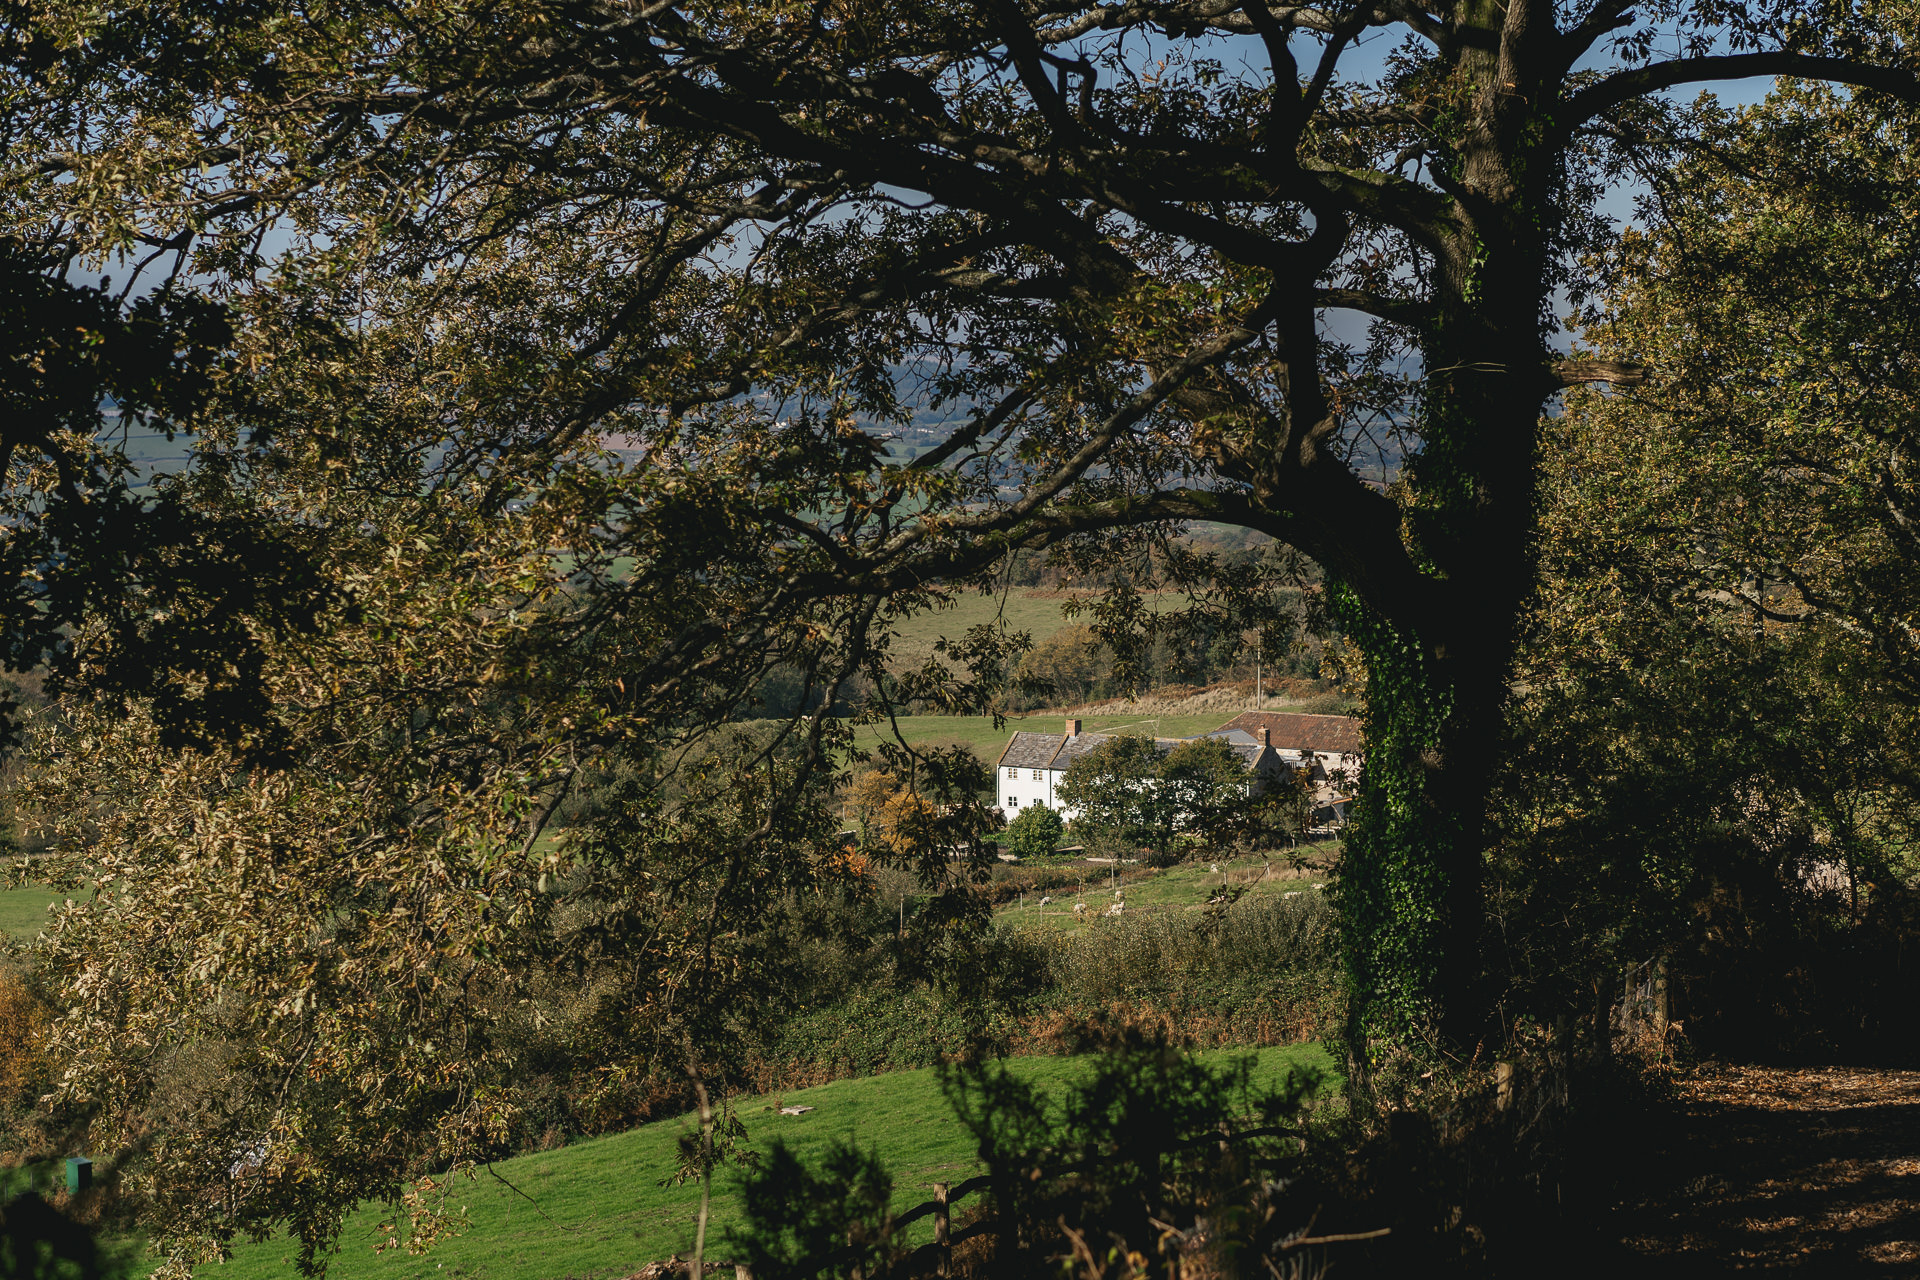 River Cottage in the distance through the trees